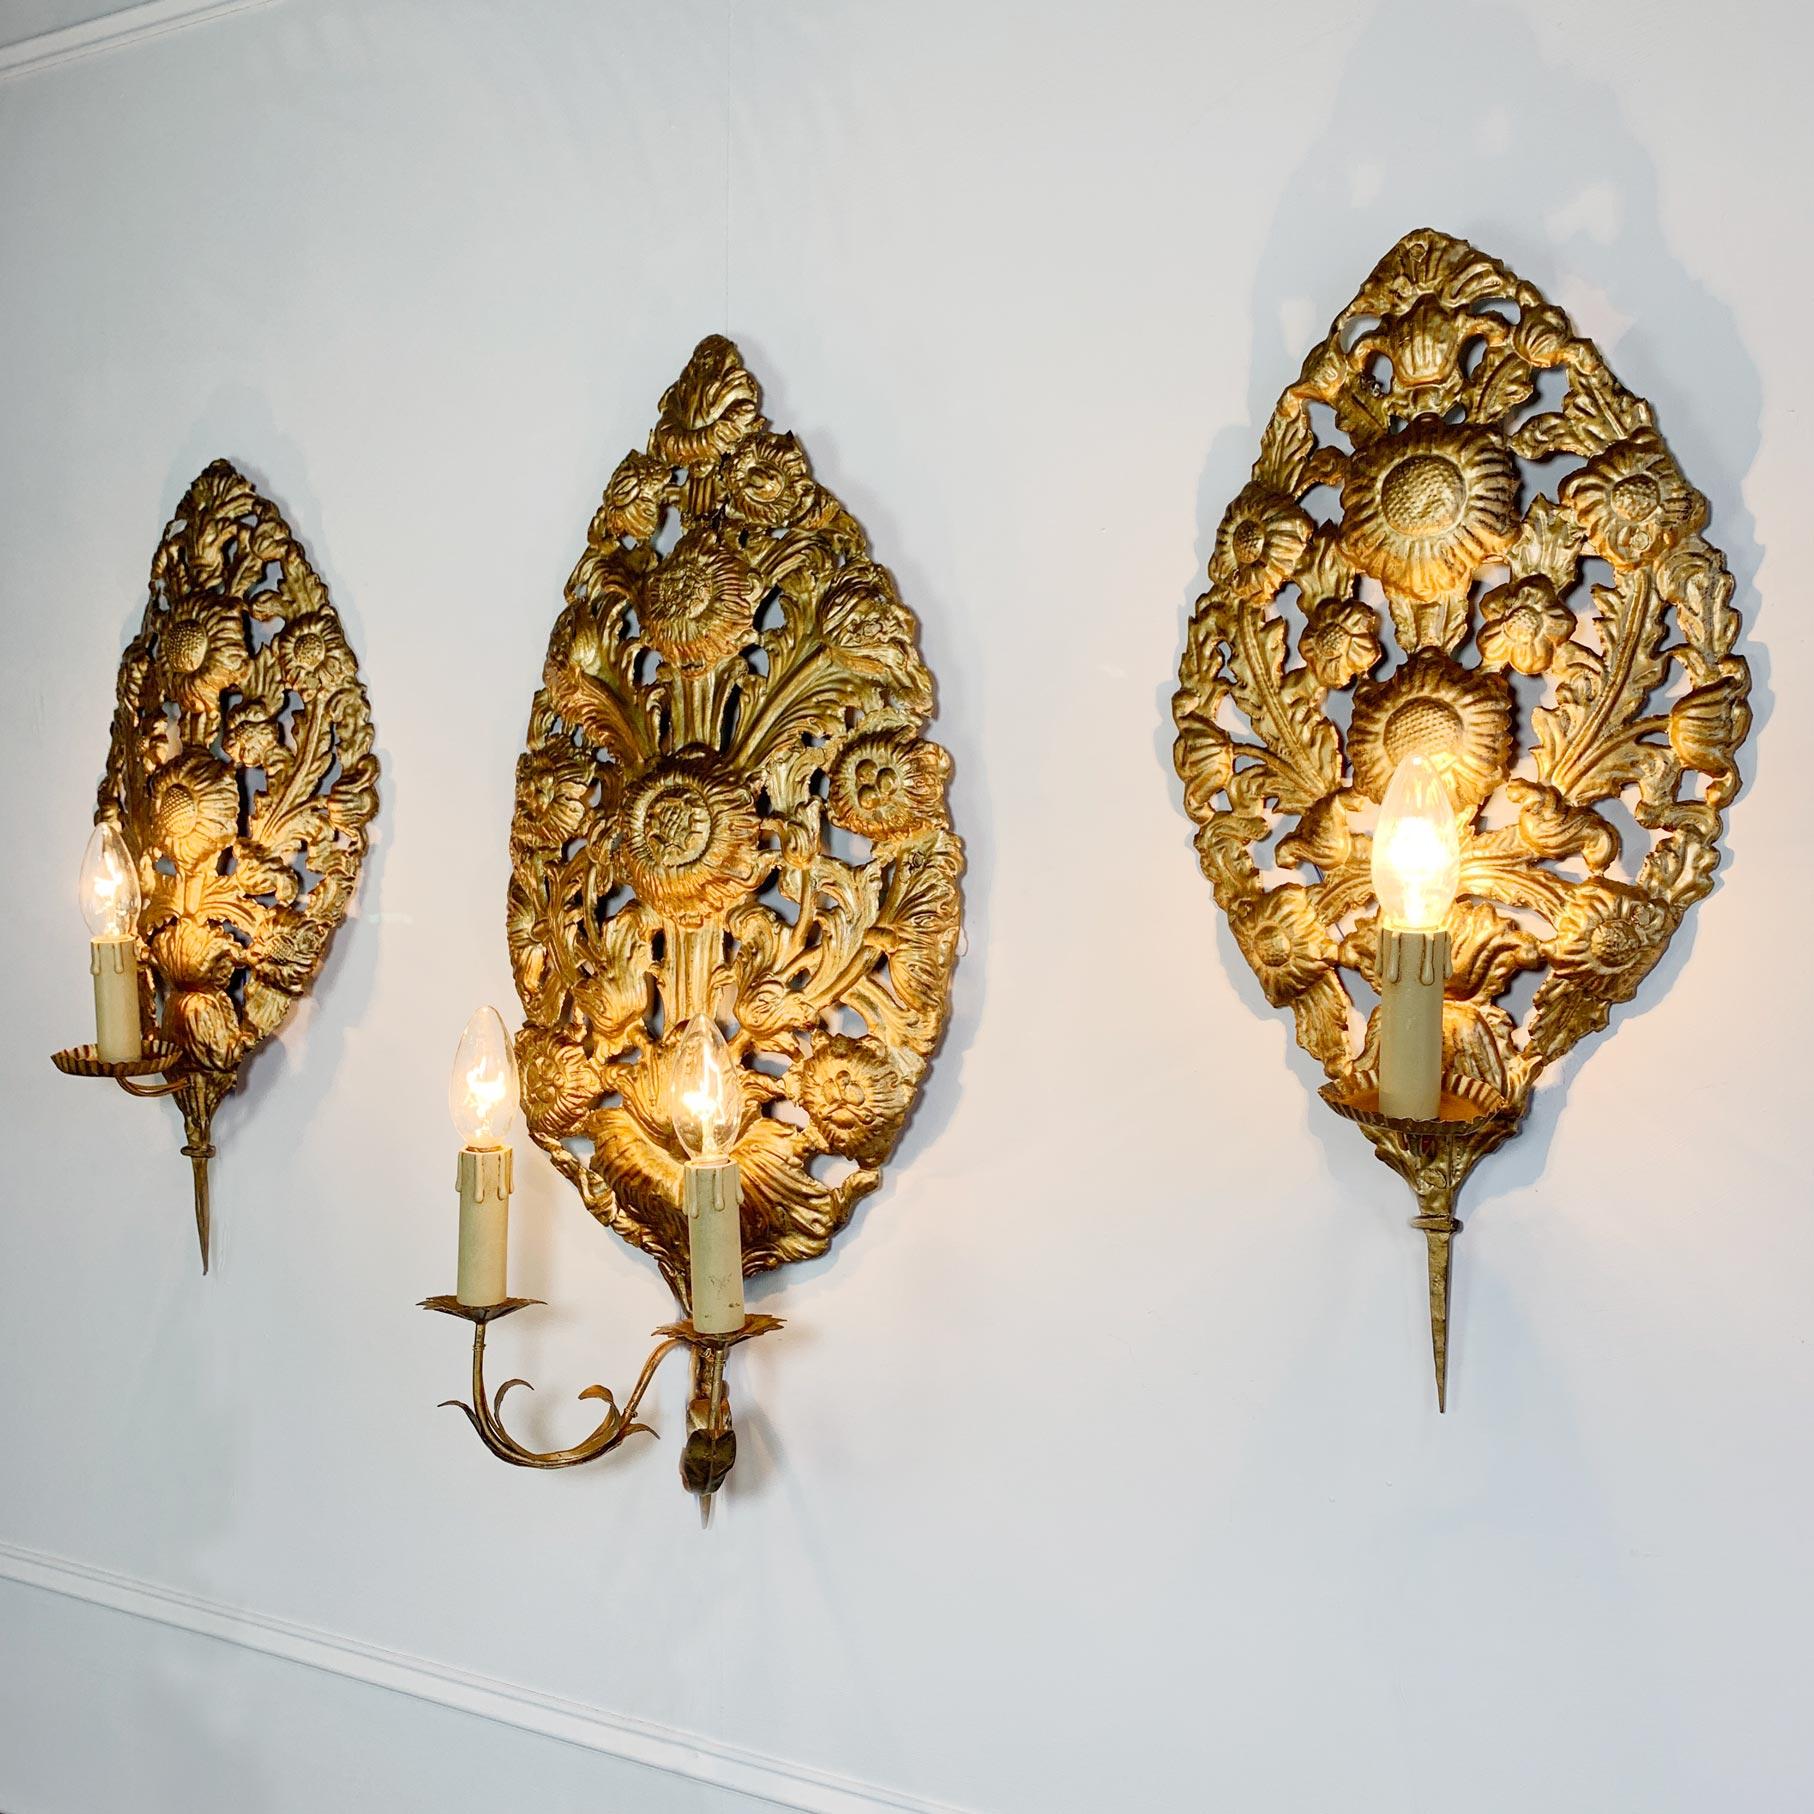 A rare set of 3 Brass Baroque repousse wall sconces

Original late 17th/ early 18th century large detailed Repoussé back plates designed with high relief of scrolling foliage and large sunflower heads. Original Iron Framework to the reverse. These